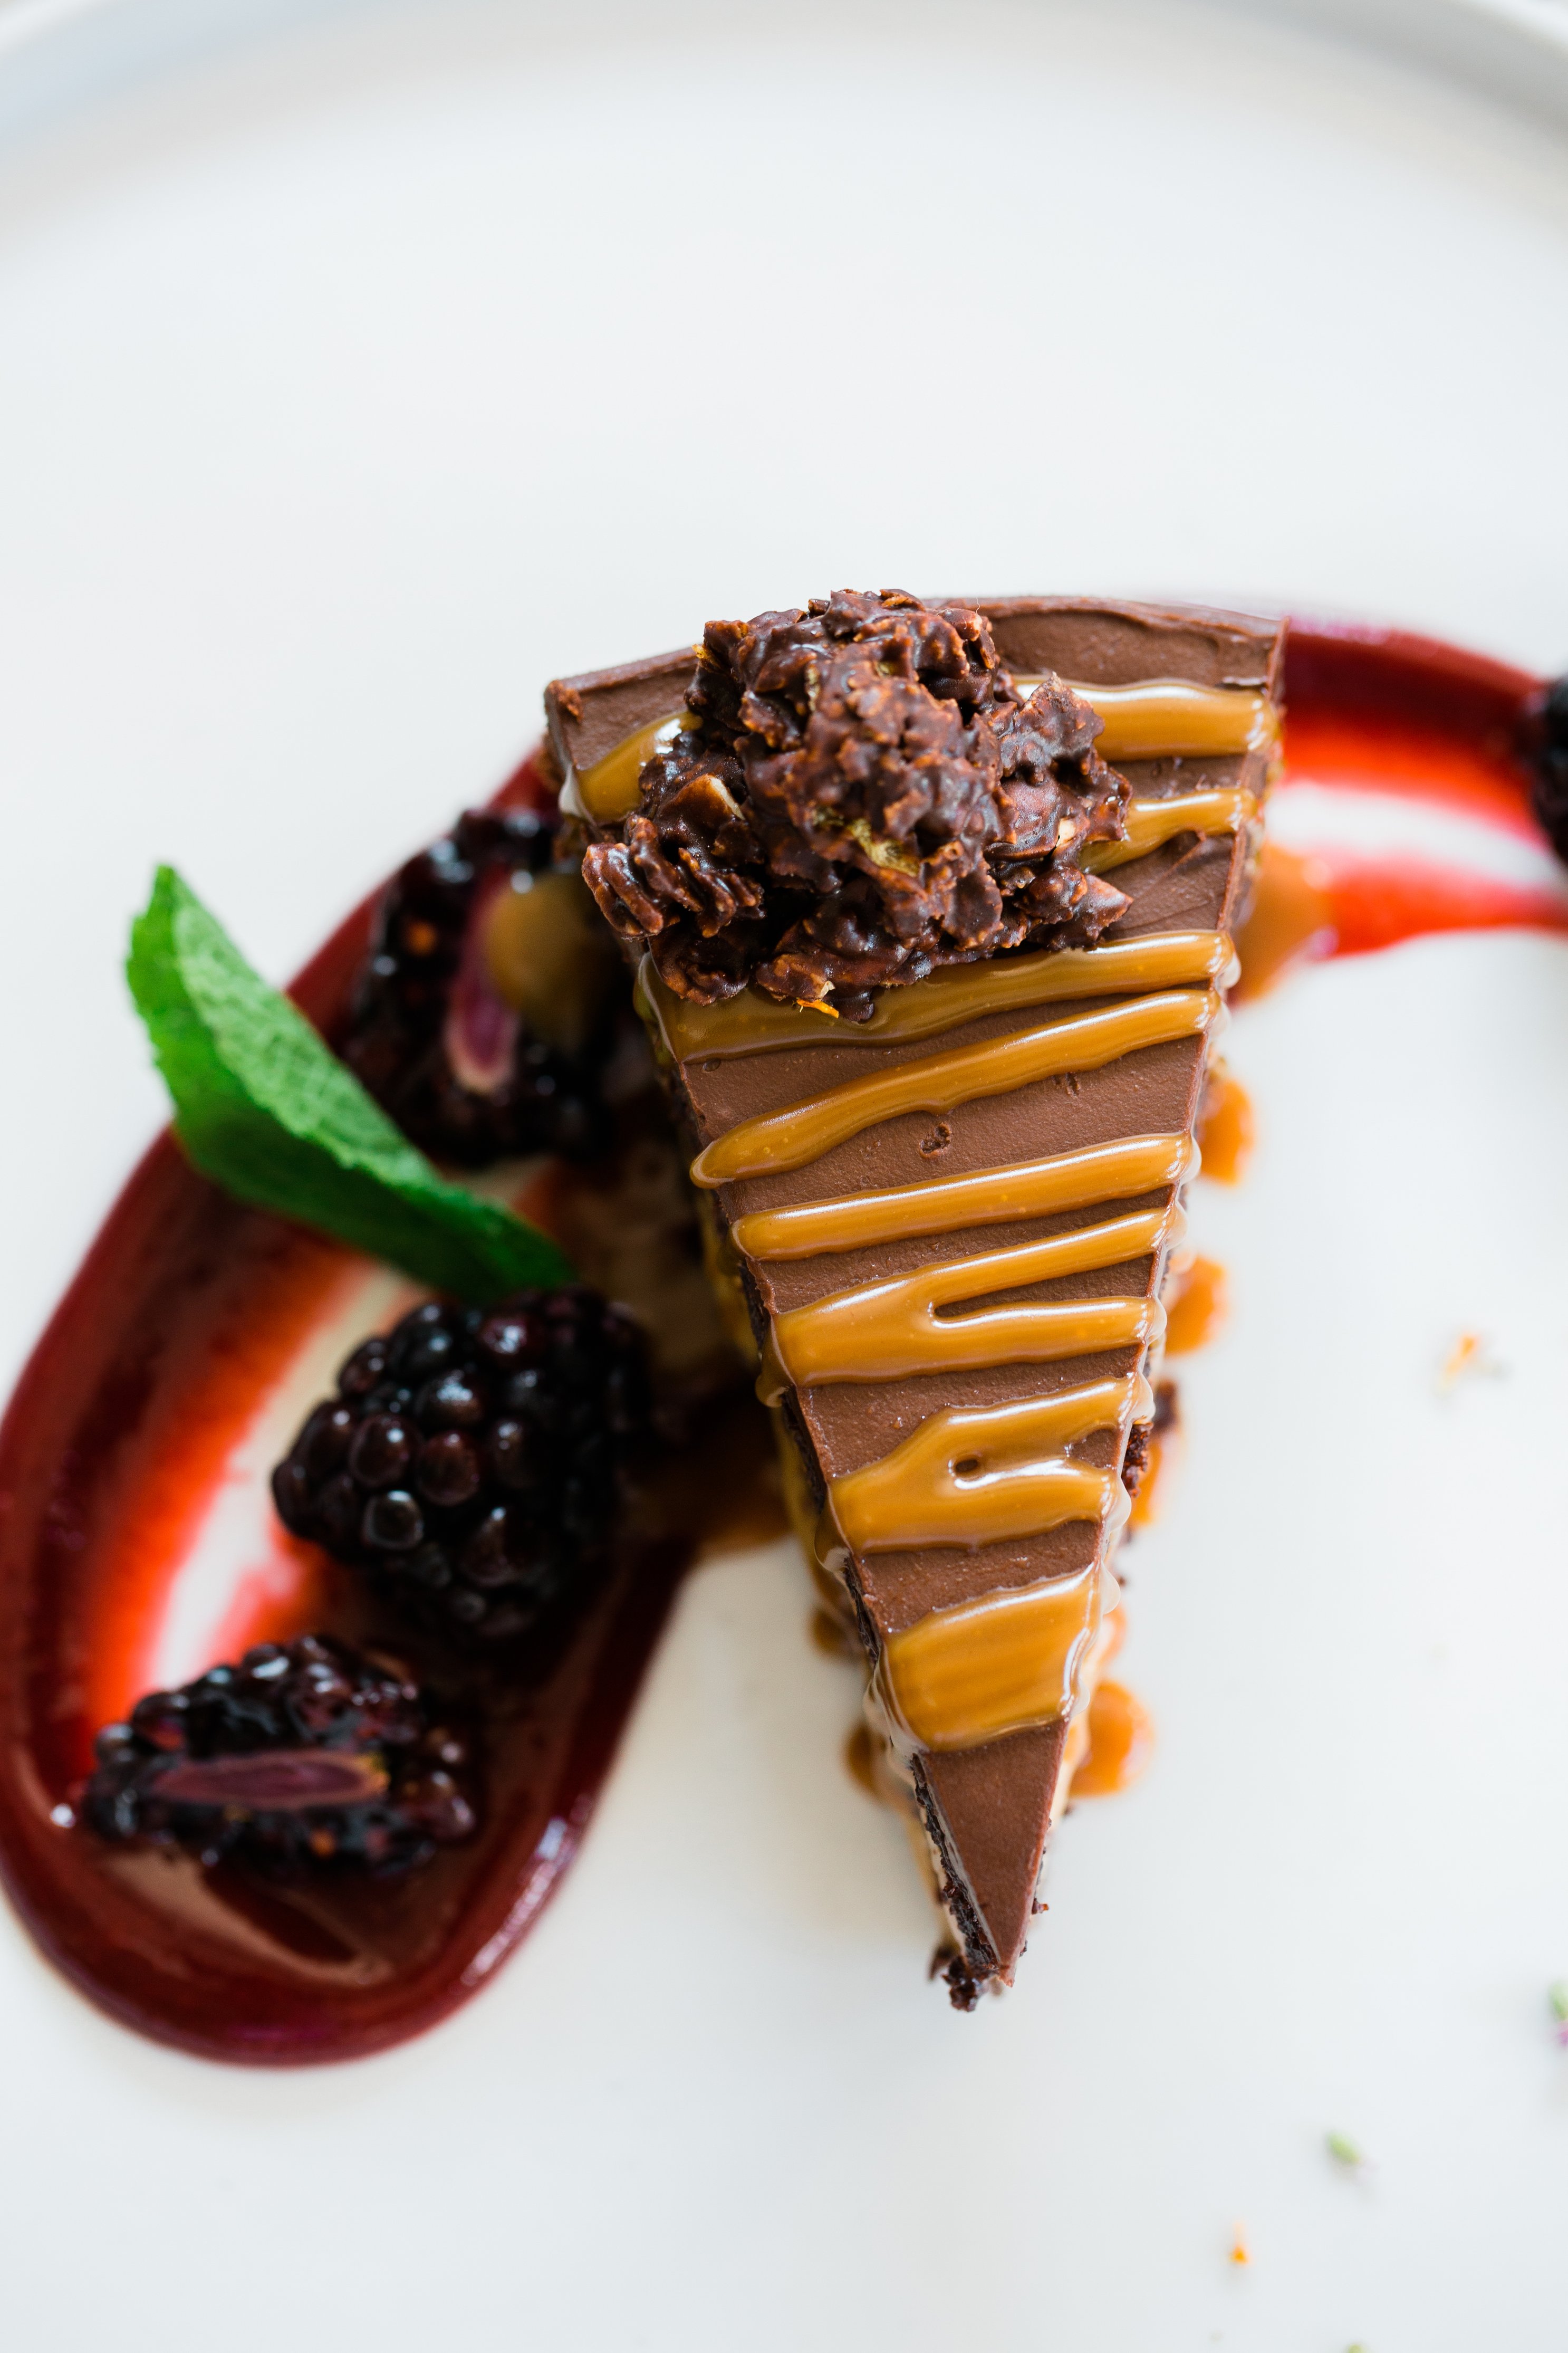 Top View Of Chocolate Cake With Raspberry Coulis by Karen Culp